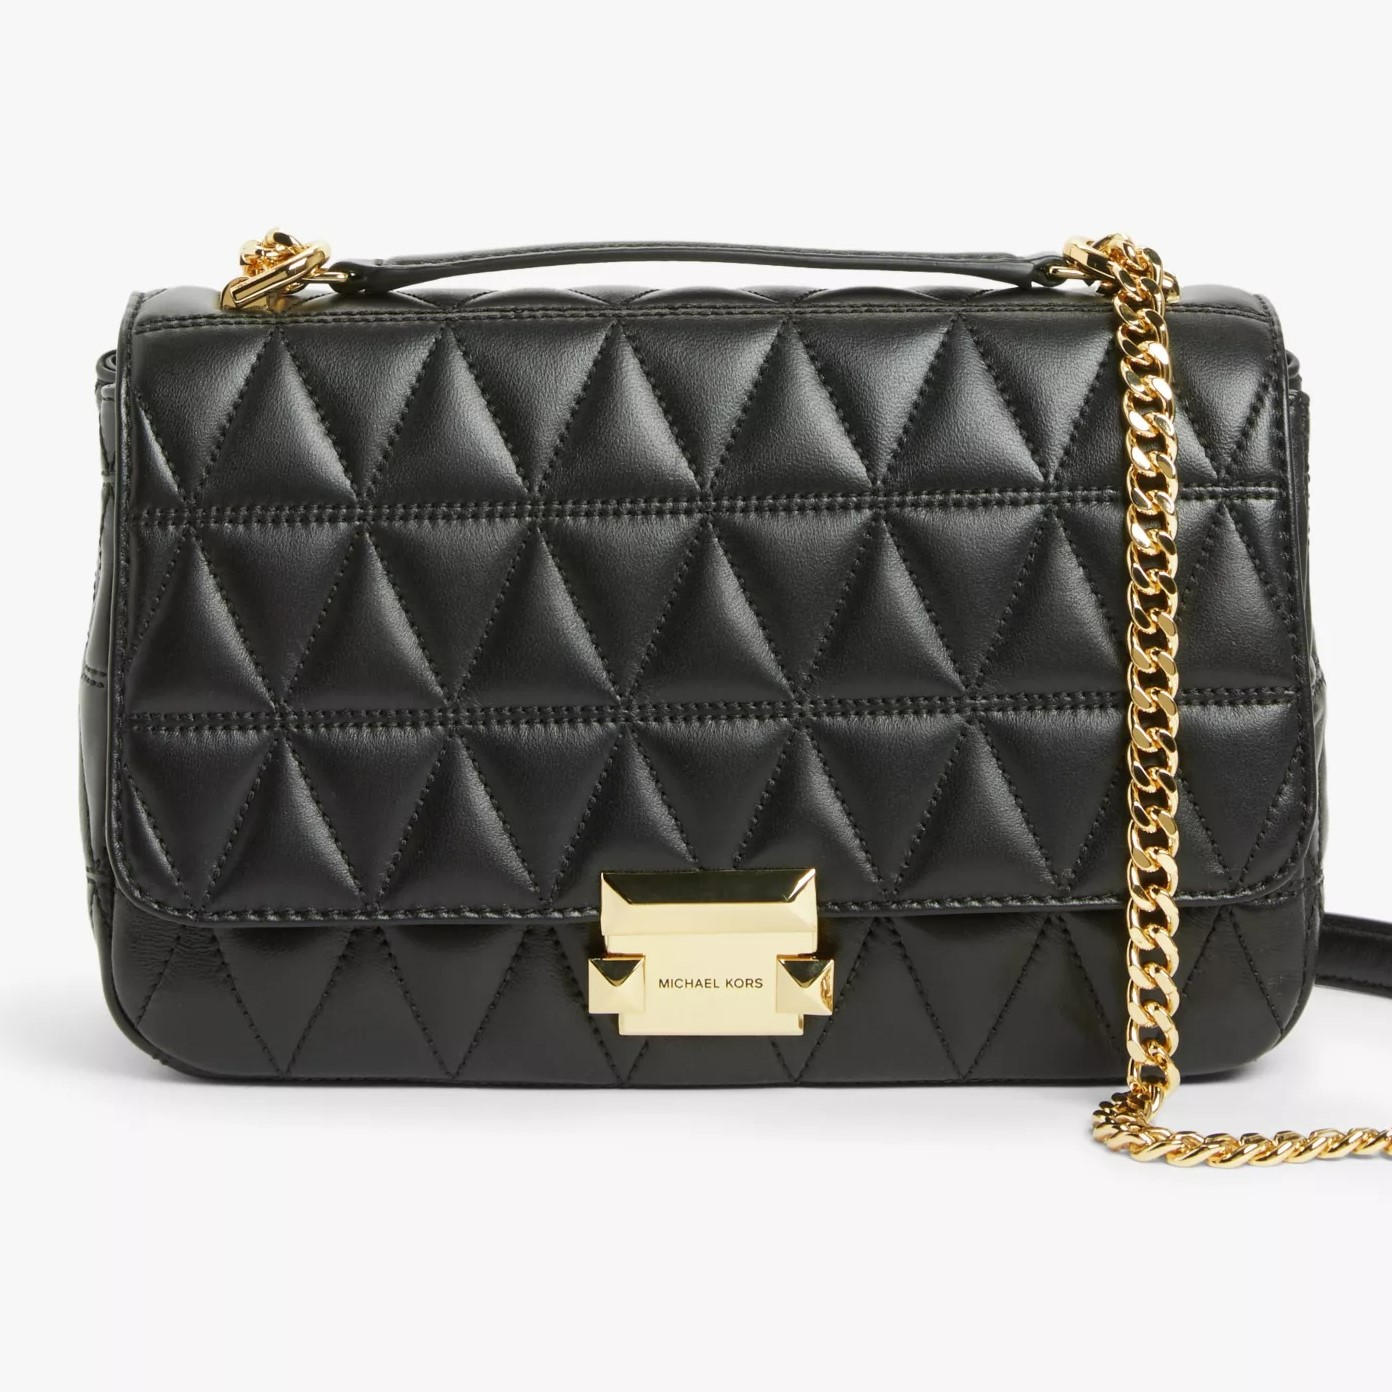 TÚI XÁCH NỮ MICHAEL KORS SLOAN LARGE QUILTED LEATHER SHOULDER BAG 10